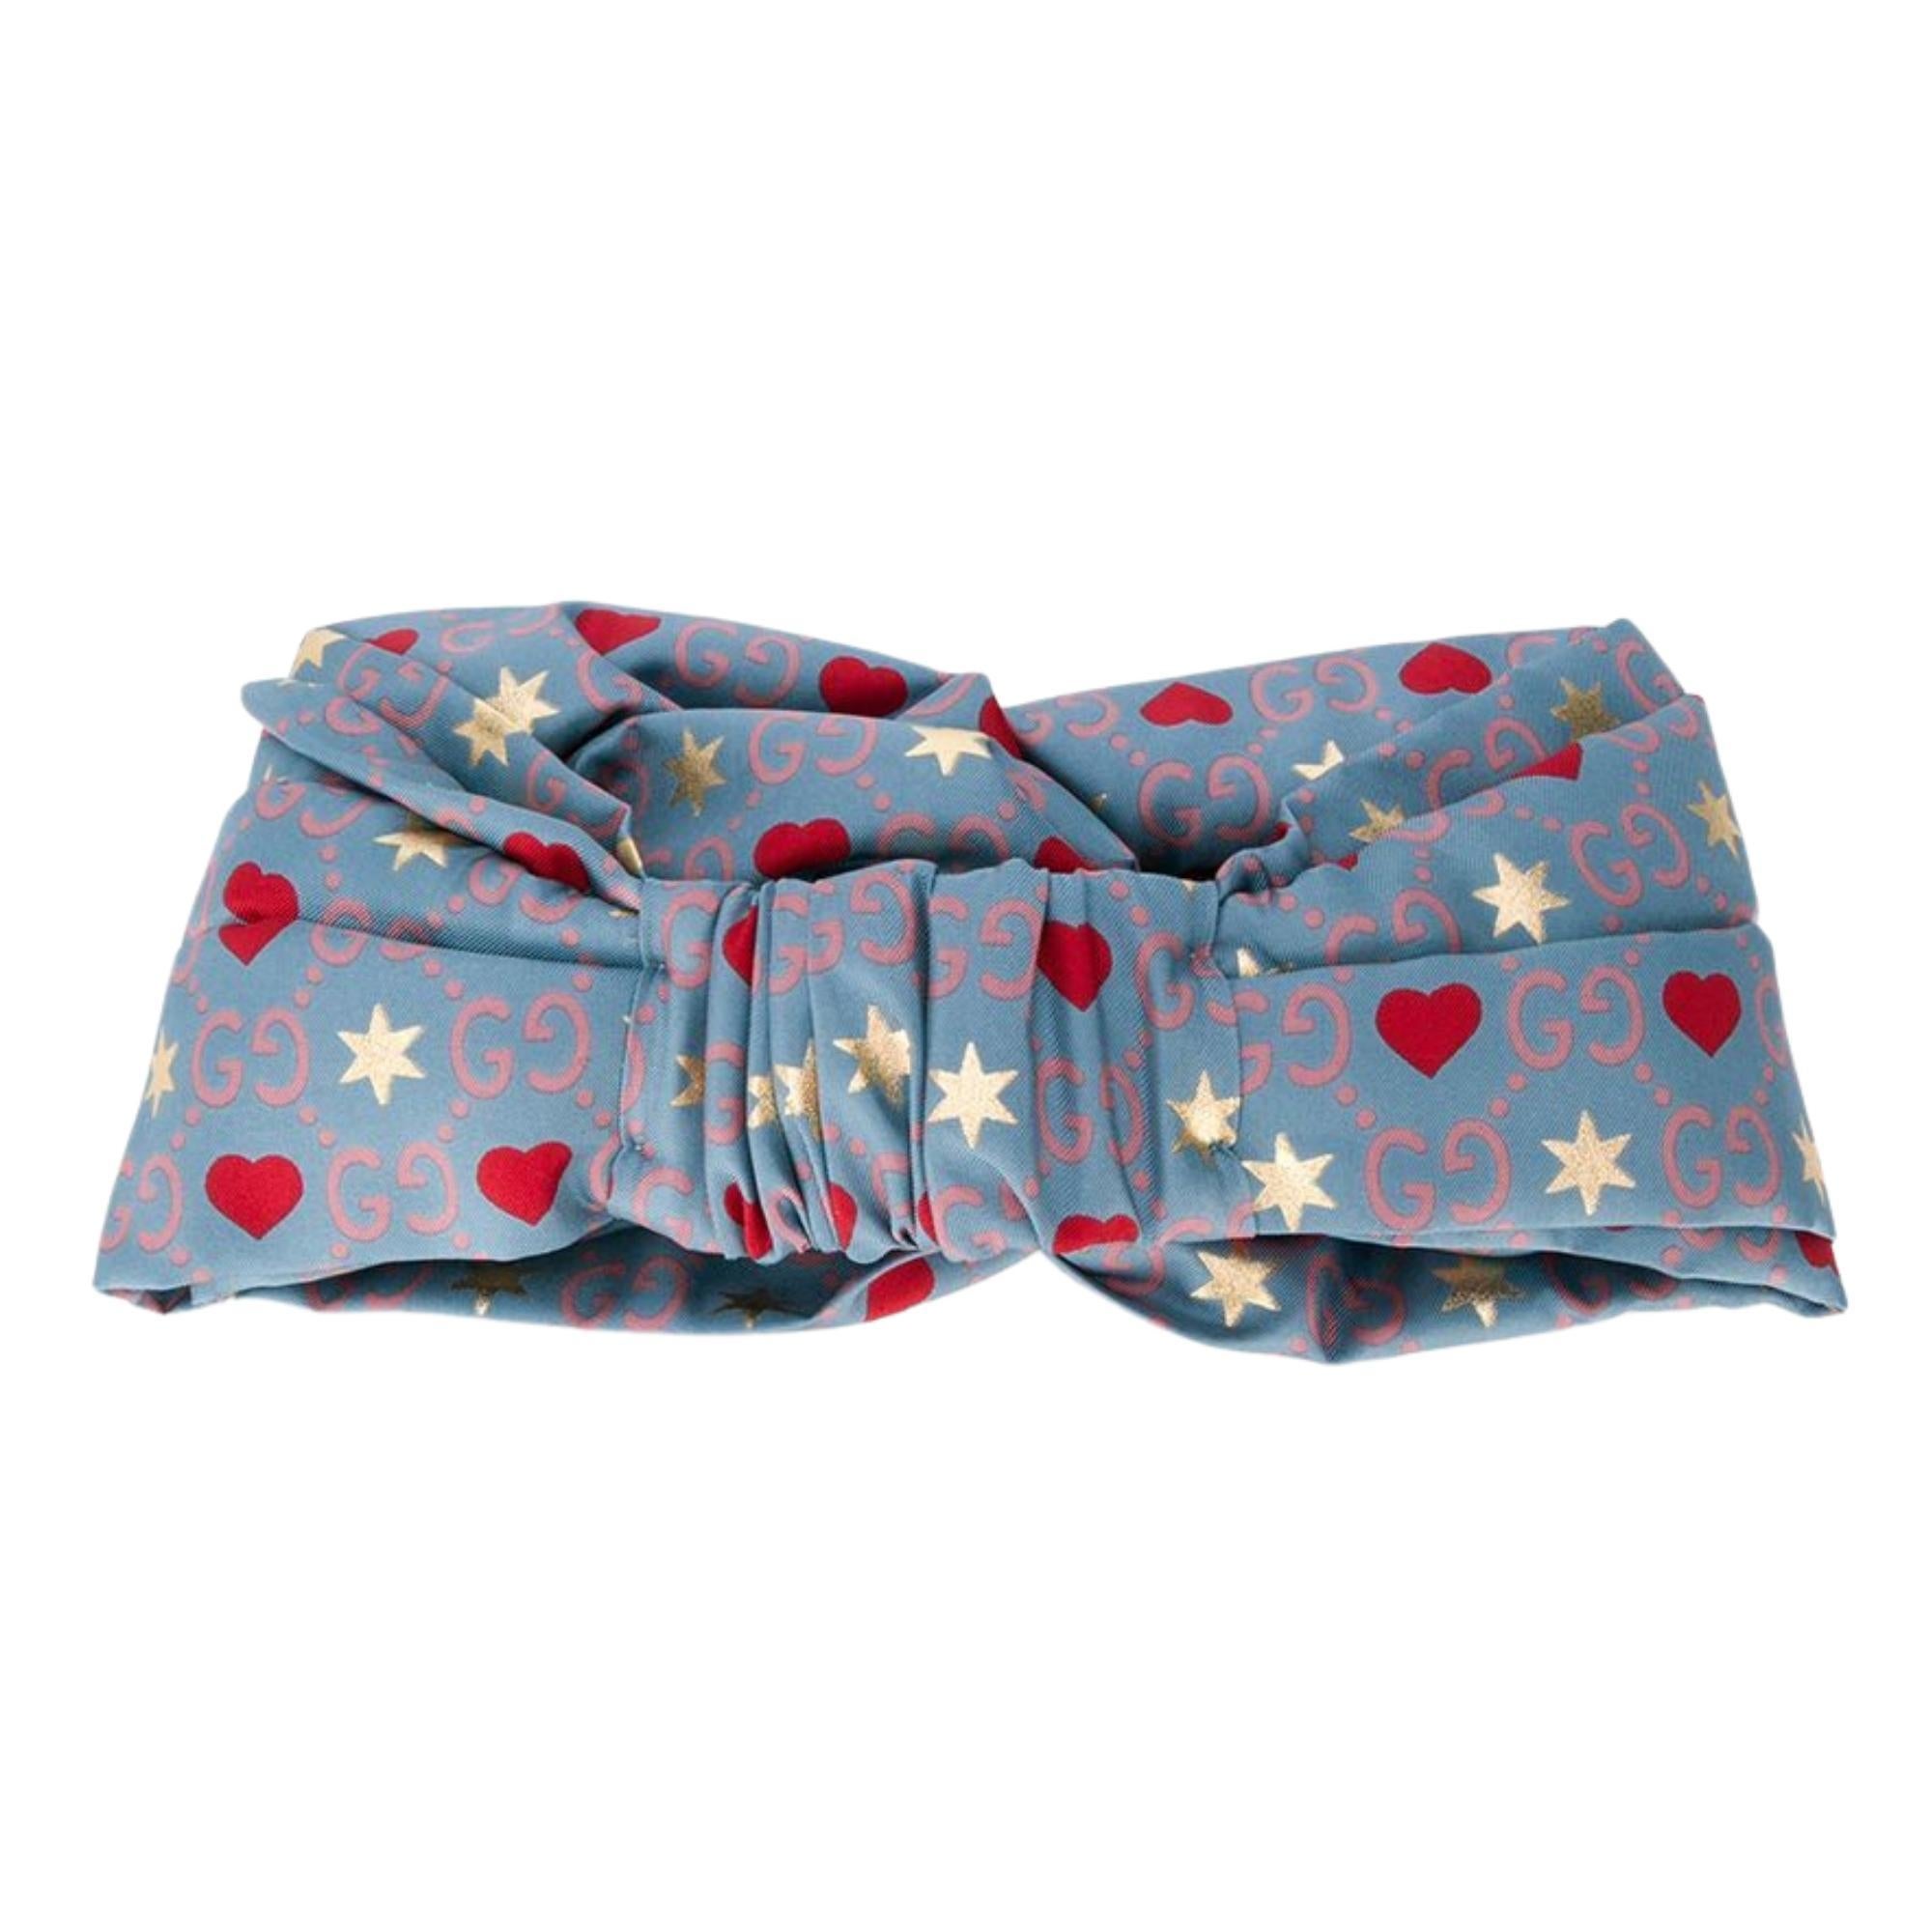 Gucci GG heart silk headband featuring a knot detail. Style with a flowy silk dress for a bohemian edit. Featuring hearts and stars with with Gucci Monogram print in pink. HB BIG DIMMBAND SE+PL TWILL

COLOR: Blue
MATERIAL: Silk & polyester
ITEM